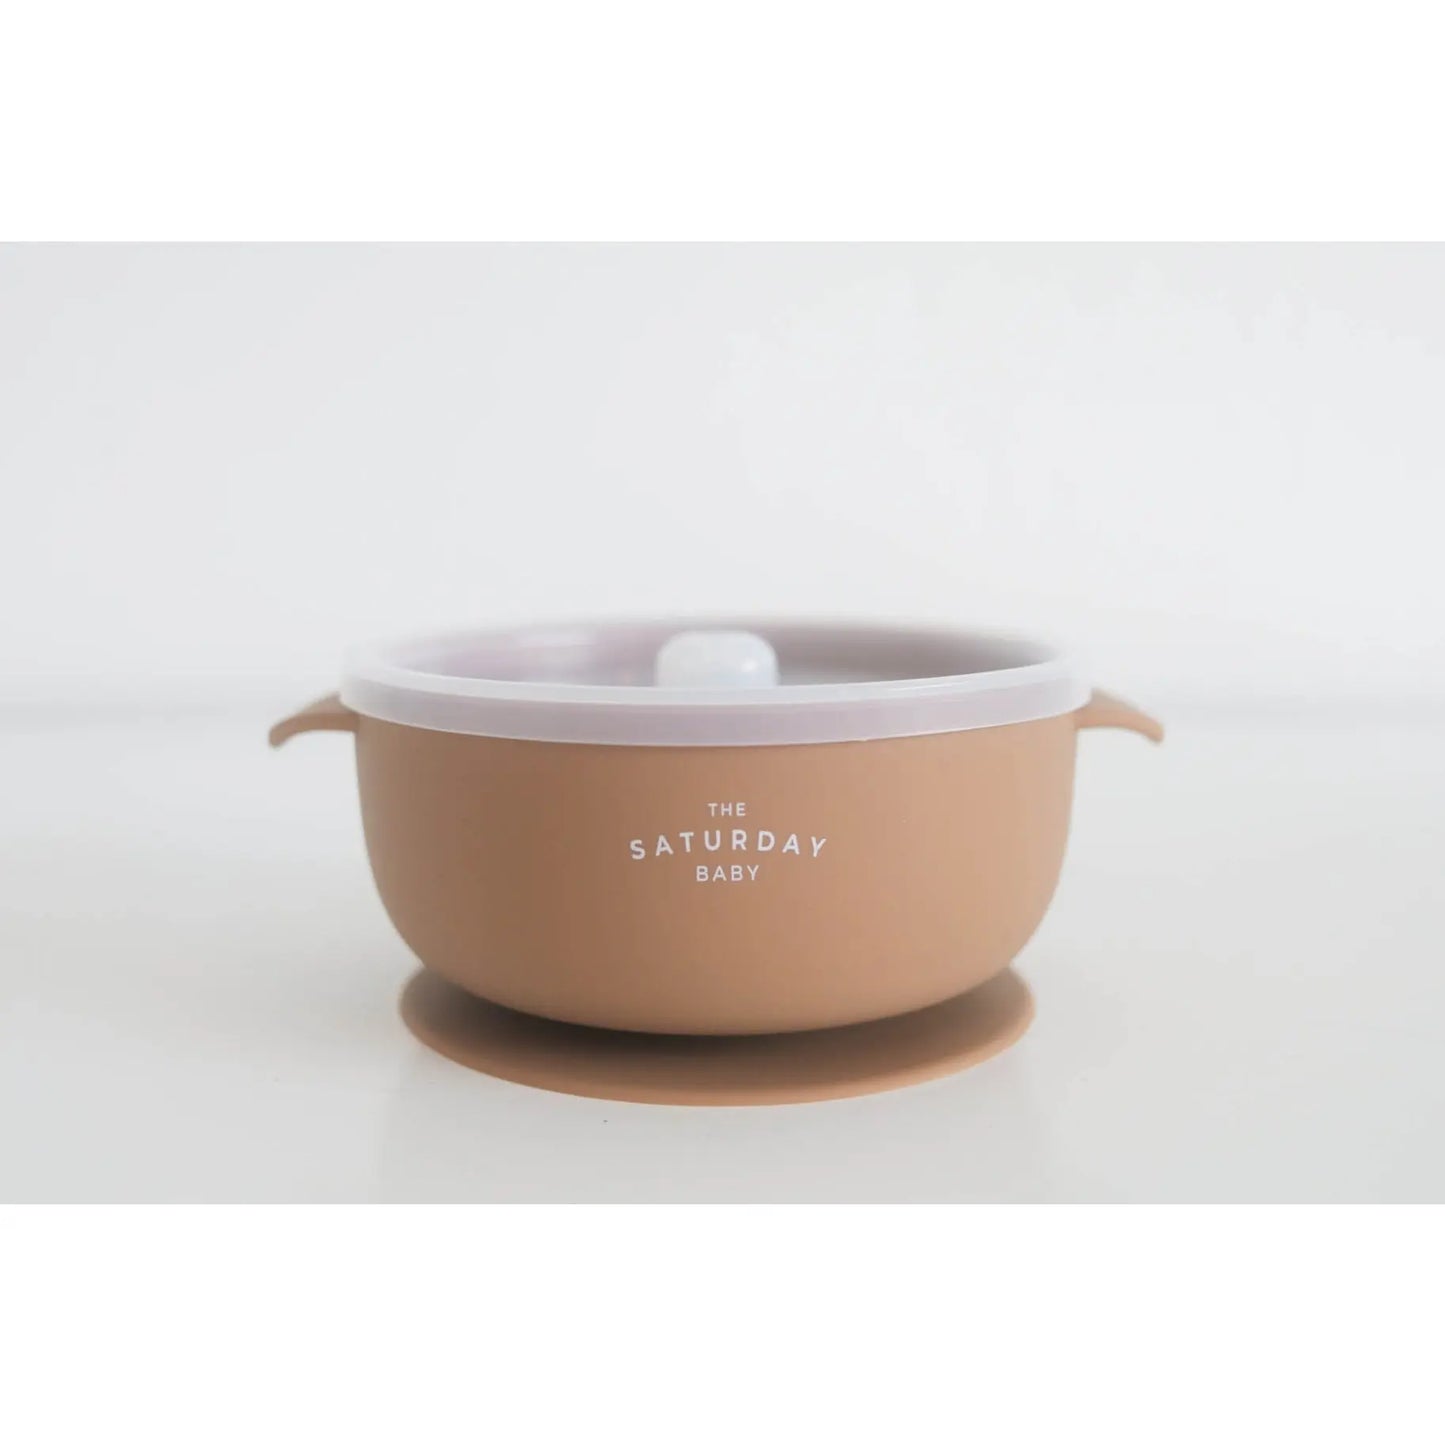 The Tiny Details Silicone Suction Bowls with Lids